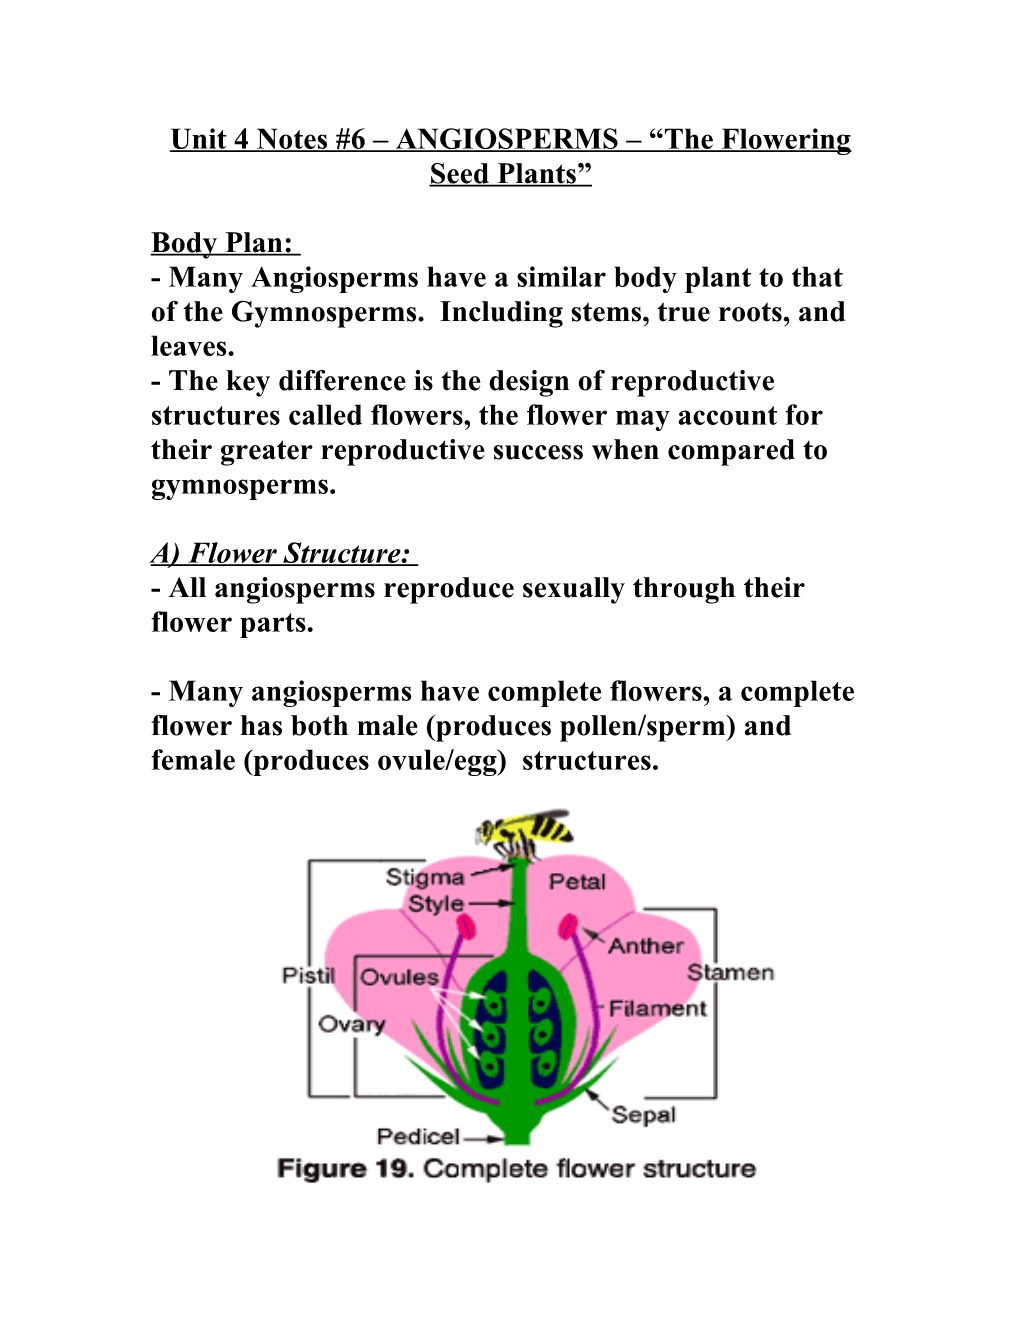 Unit 4 Notes #6 ANGIOSPERMS the Flowering Seed Plants